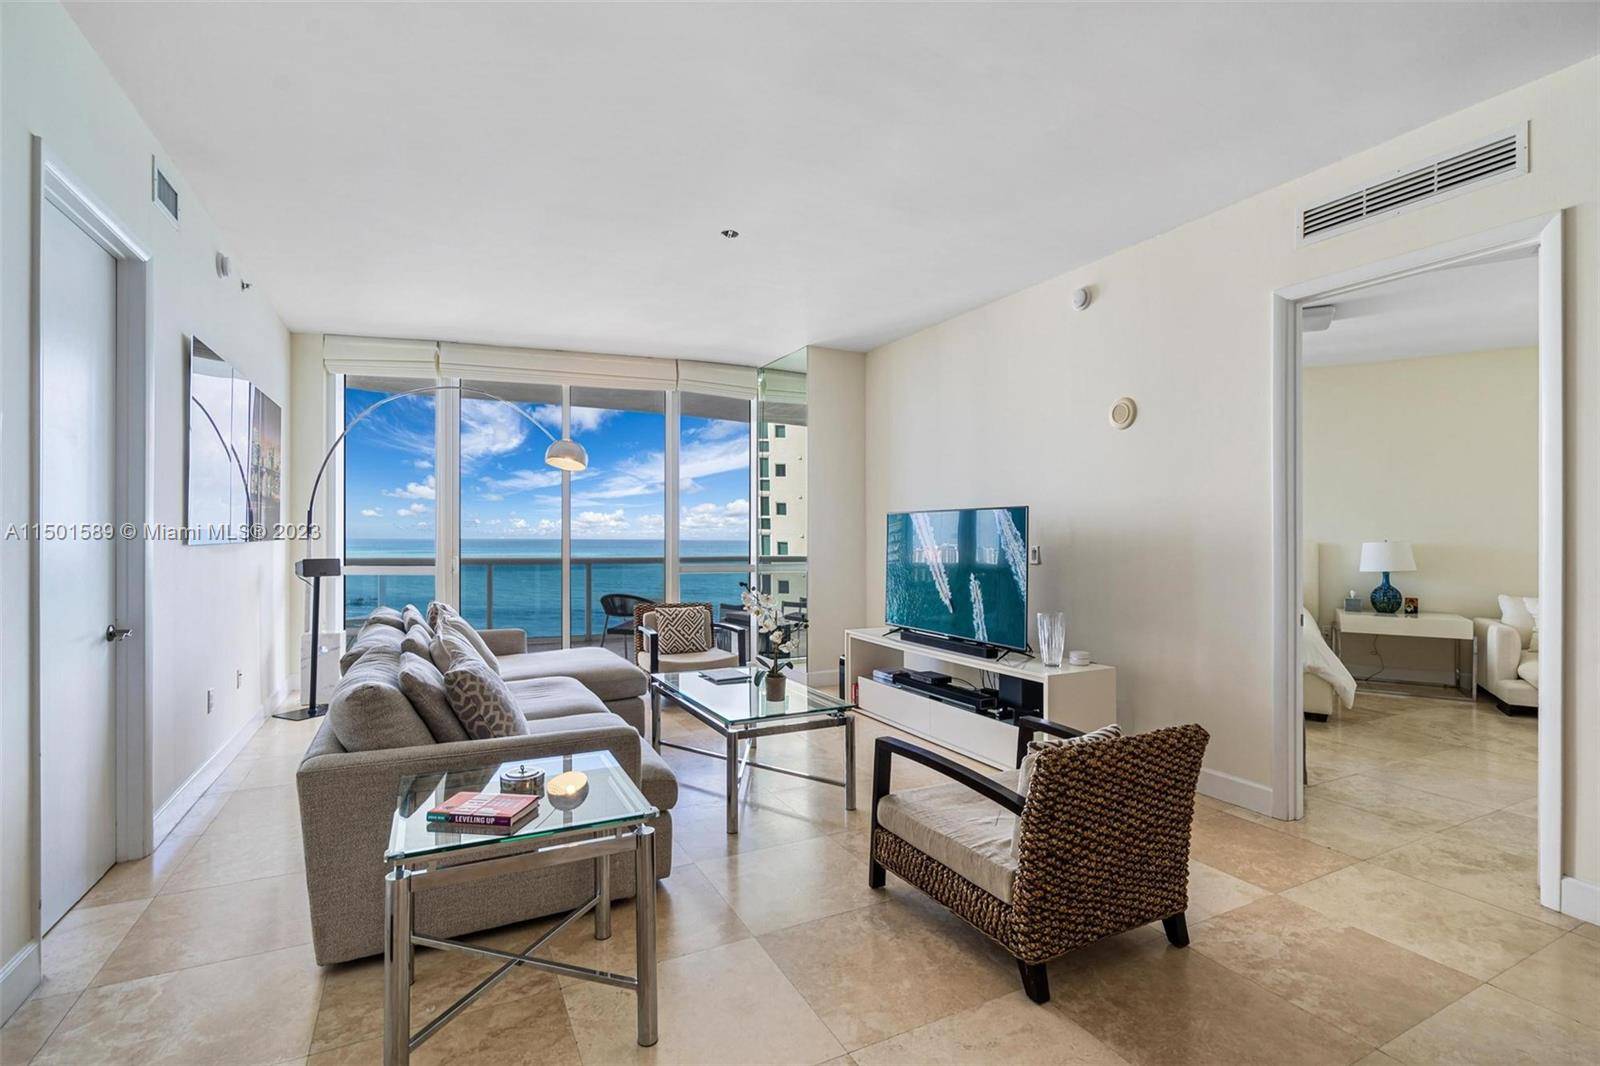 Spectacular residence with Ocean and intracoastal views from every room, You must see this beautiful 2 bed den, 3 bath residence.